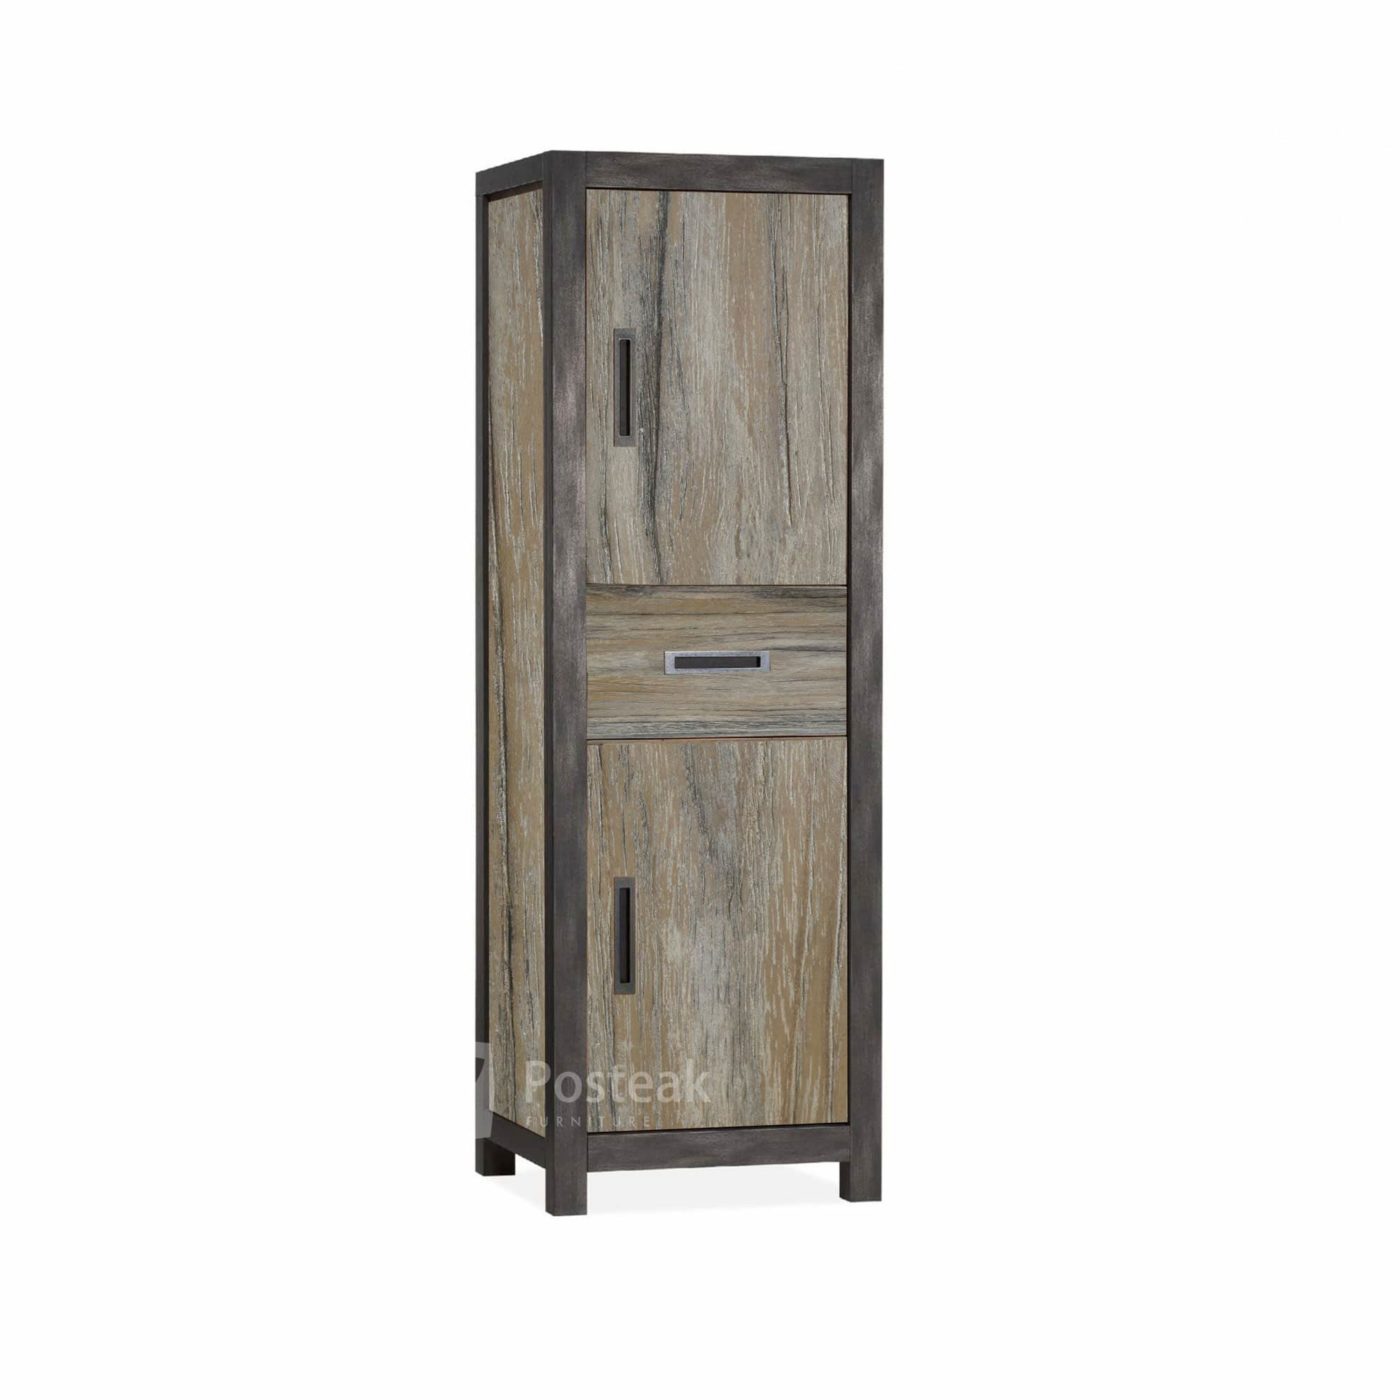 taek bookcase with rustic black painted denver